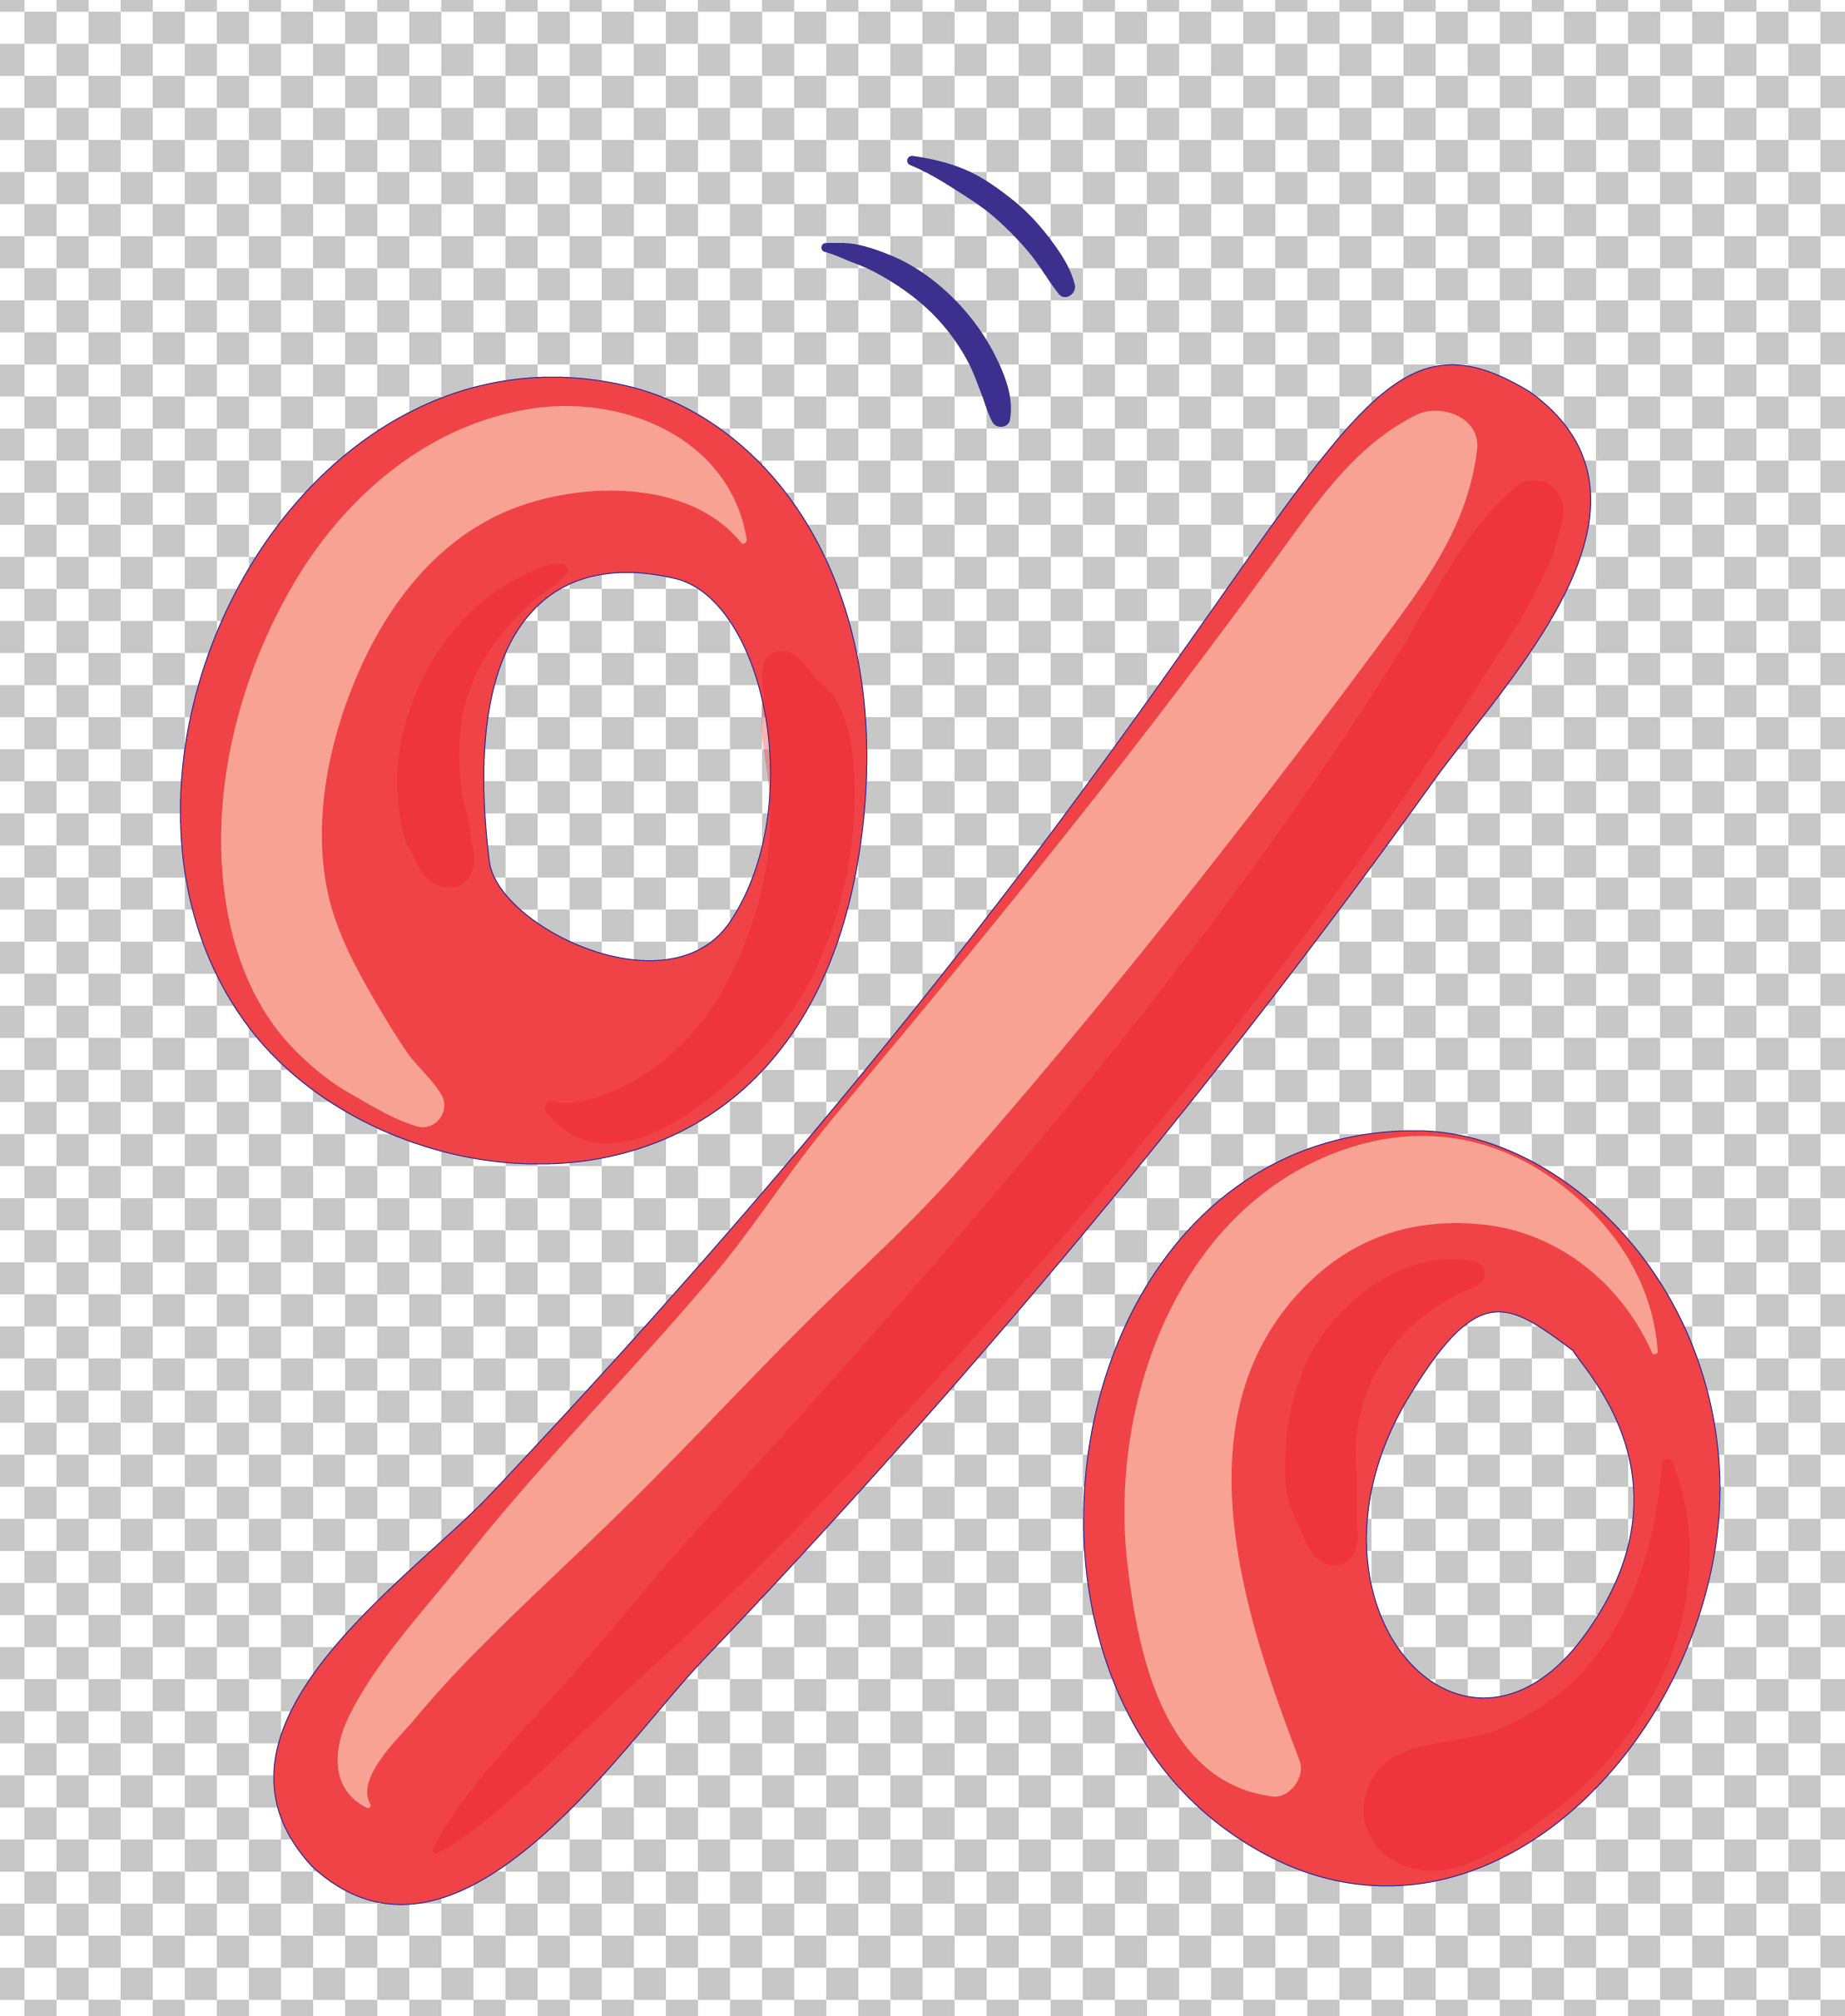 Red Modulus Operator Sign PNG Image